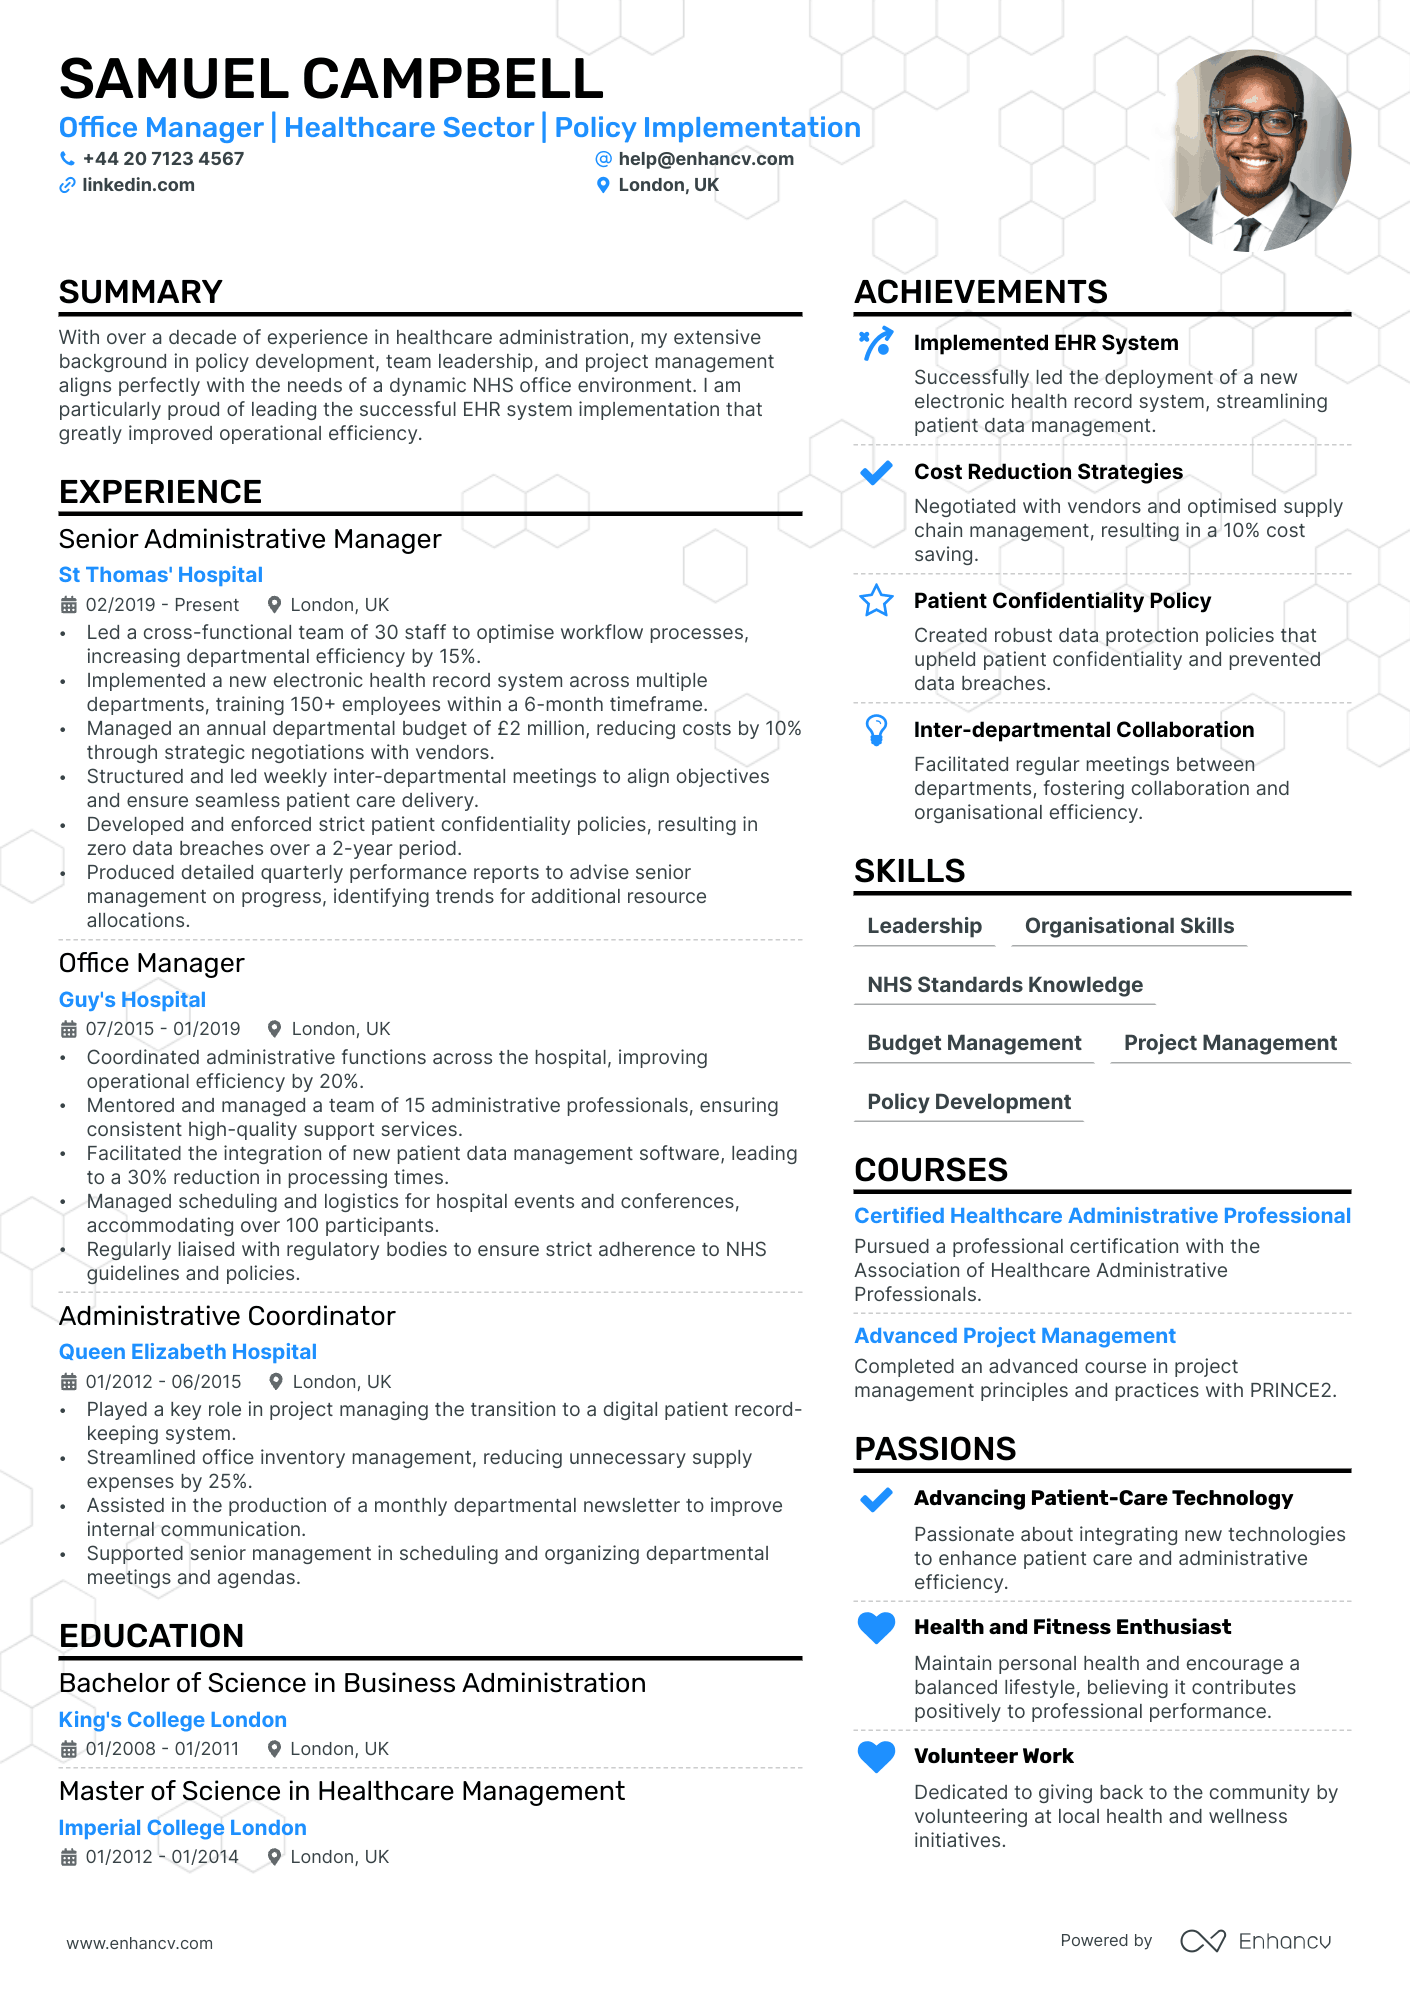 Office Manager cv example